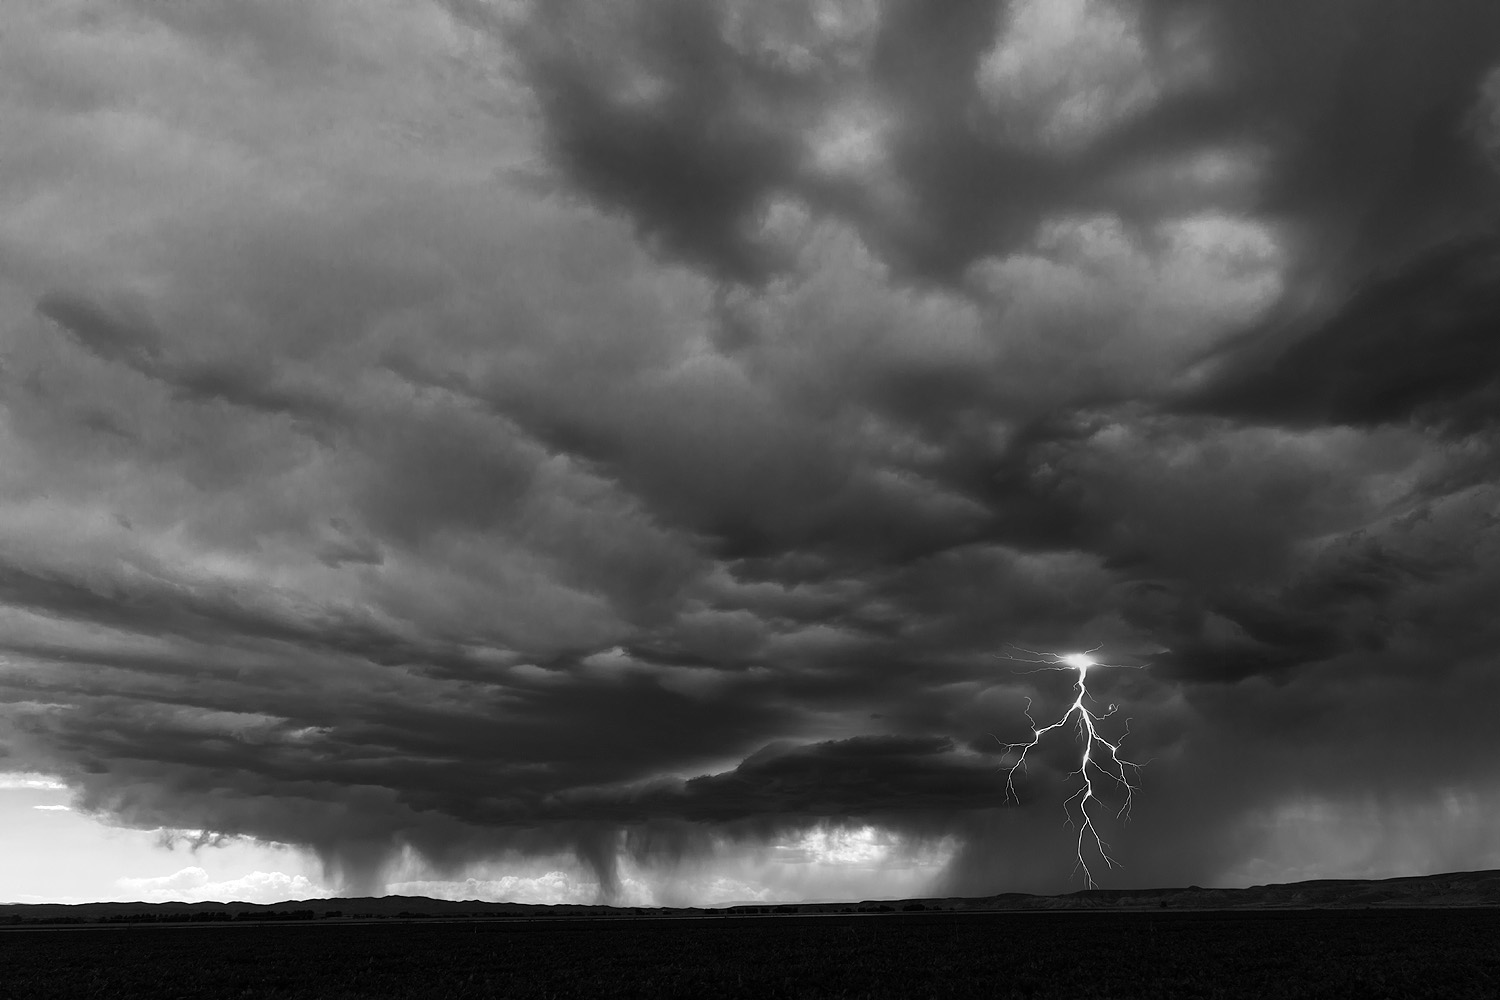 A midday electrical storm passes over a field along Lane 14, near Thermopolis, Wyoming